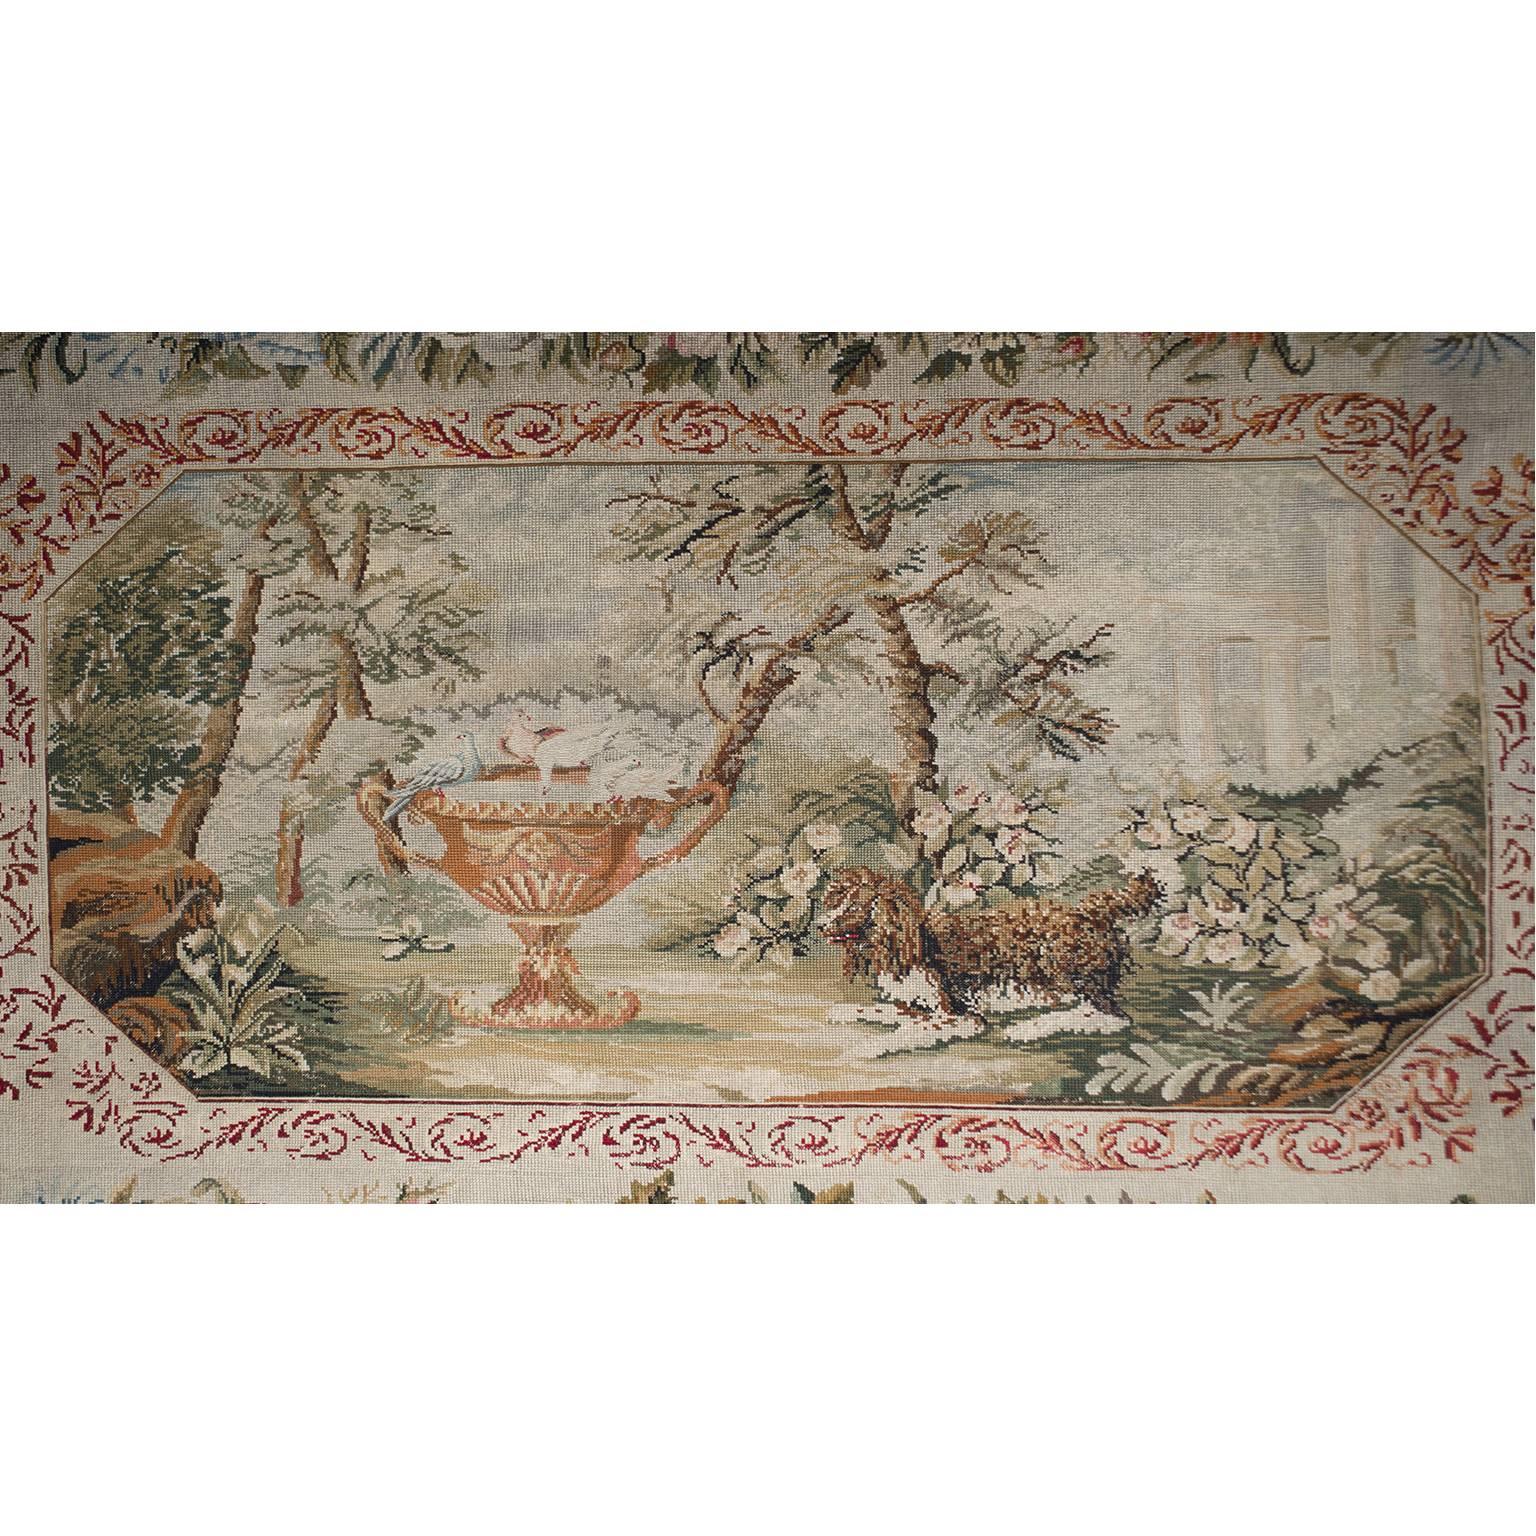 19th Century European Needlepoint Tapestry In Good Condition For Sale In Rome, IT